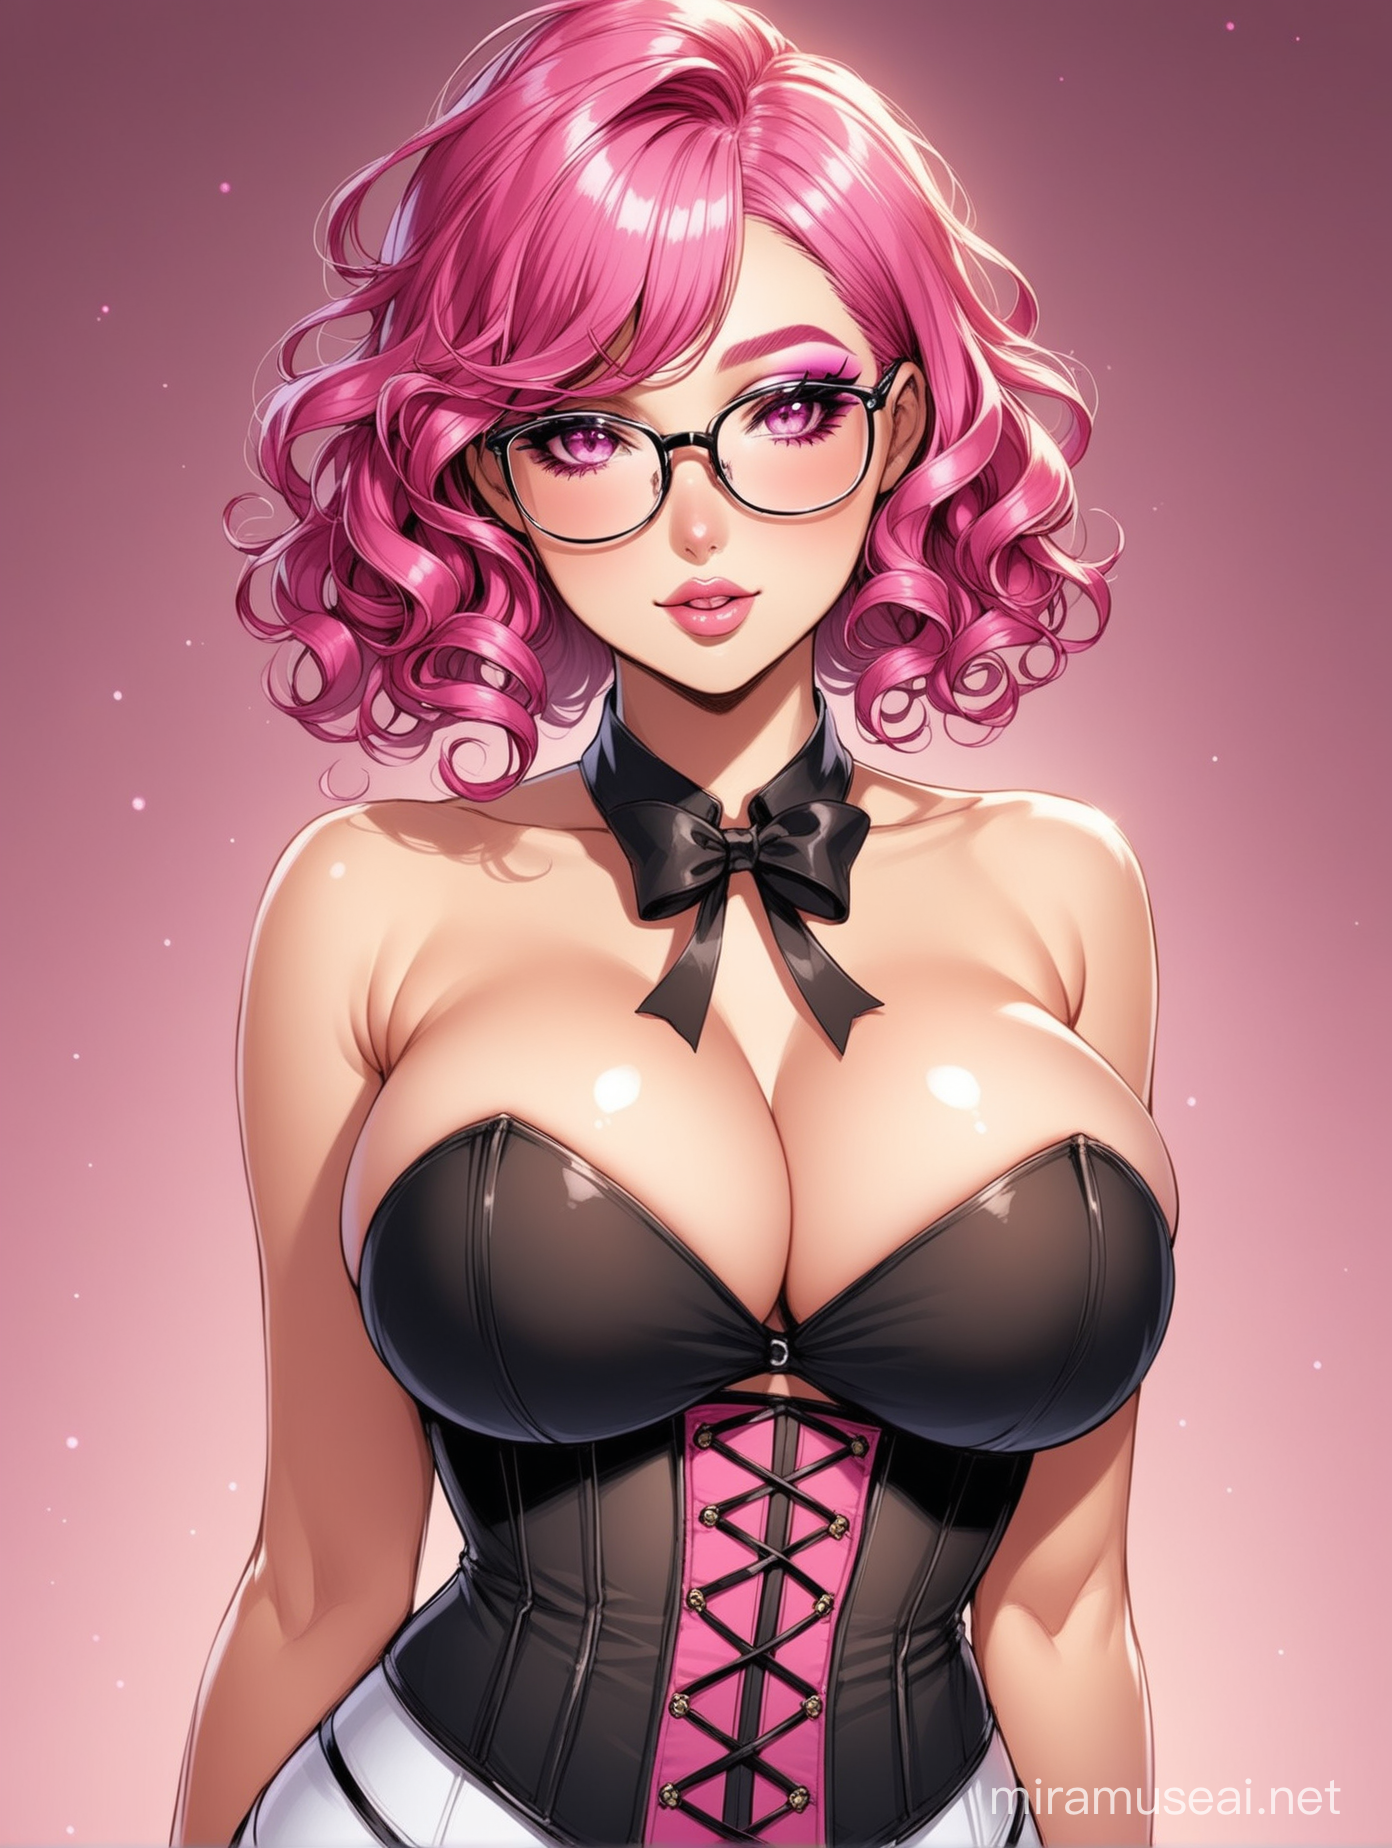 Glamorous Woman with Pink Curly Hair Glasses and Corset